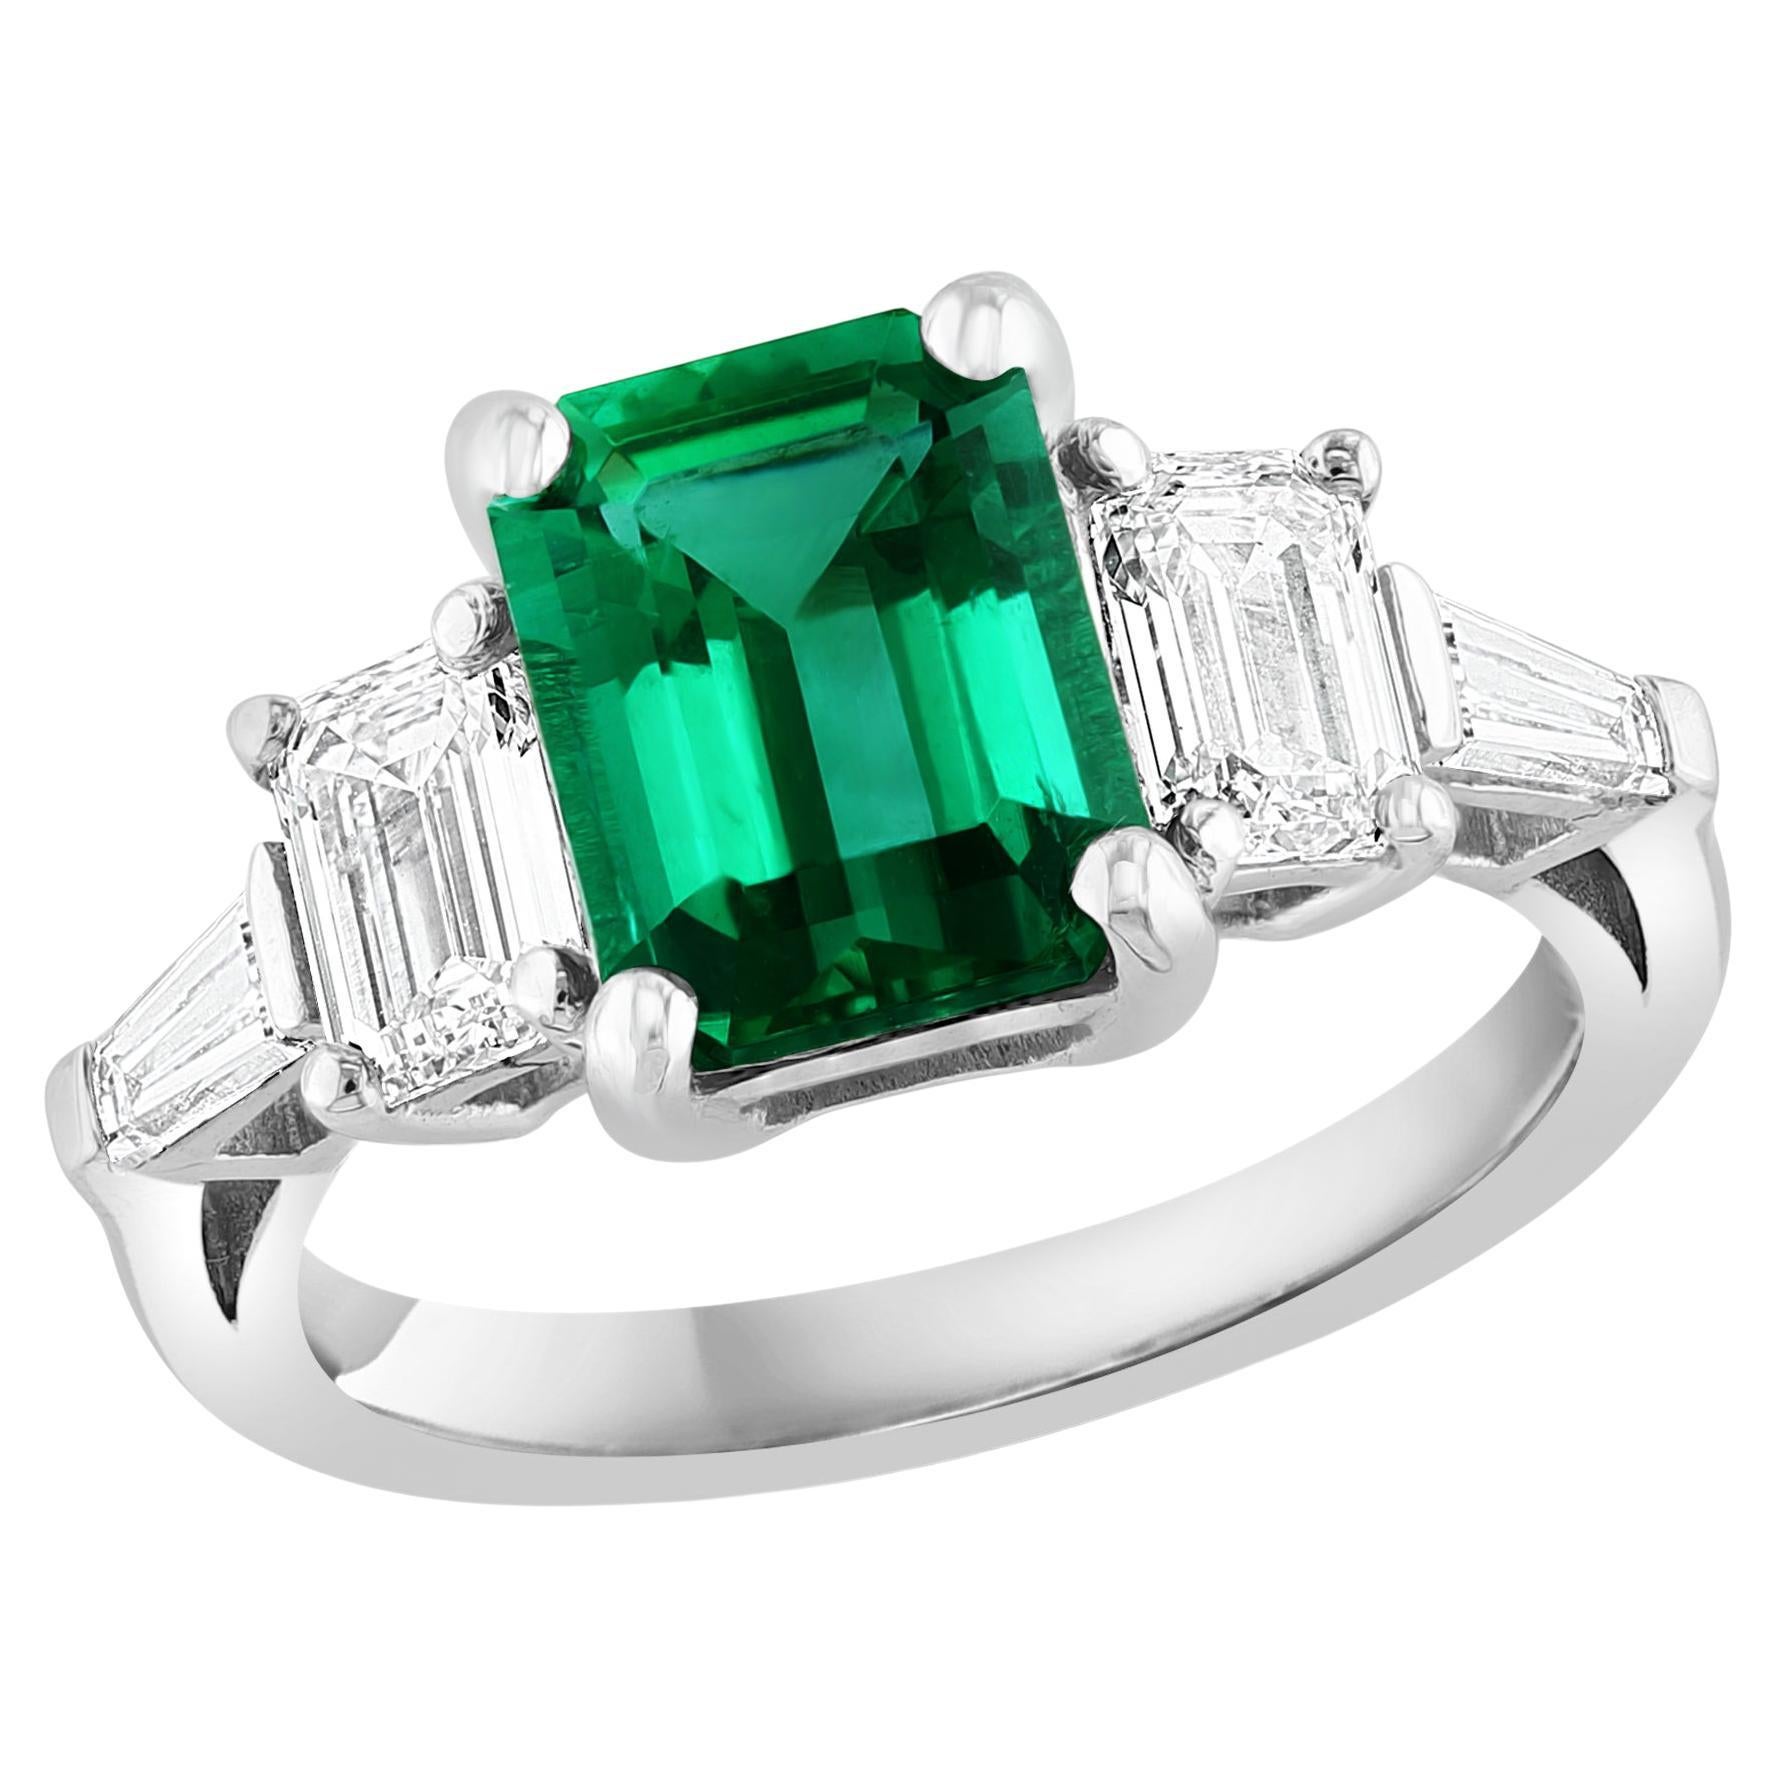 Certified 2.22 Carat Emerald Cut Emerald and Diamond Five-Stone Engagement Ring